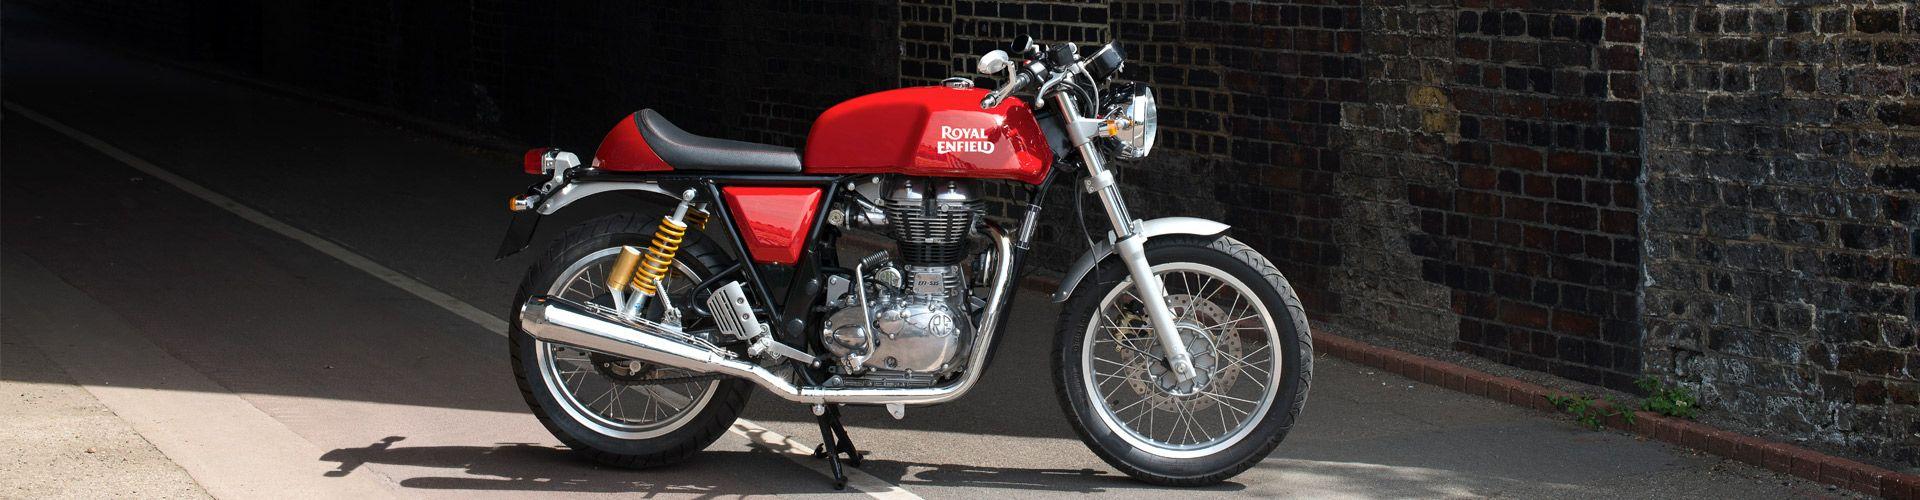 Continental GT Gallery. Royal Enfield Motorcycles